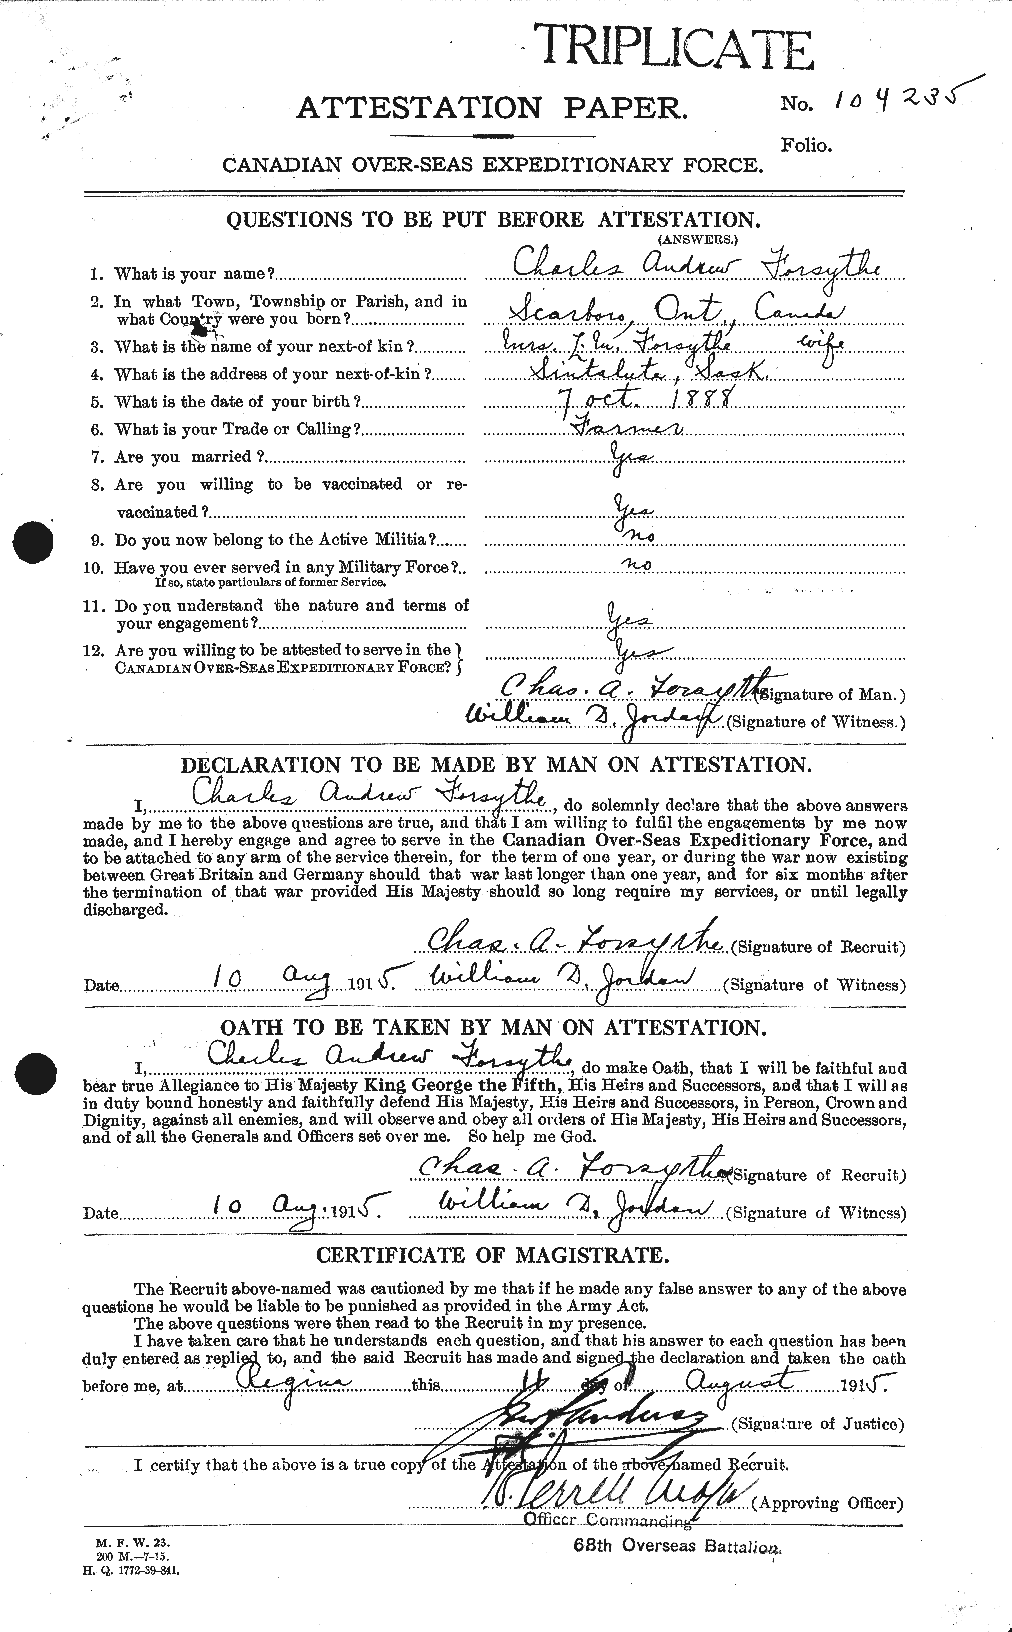 Personnel Records of the First World War - CEF 331487a